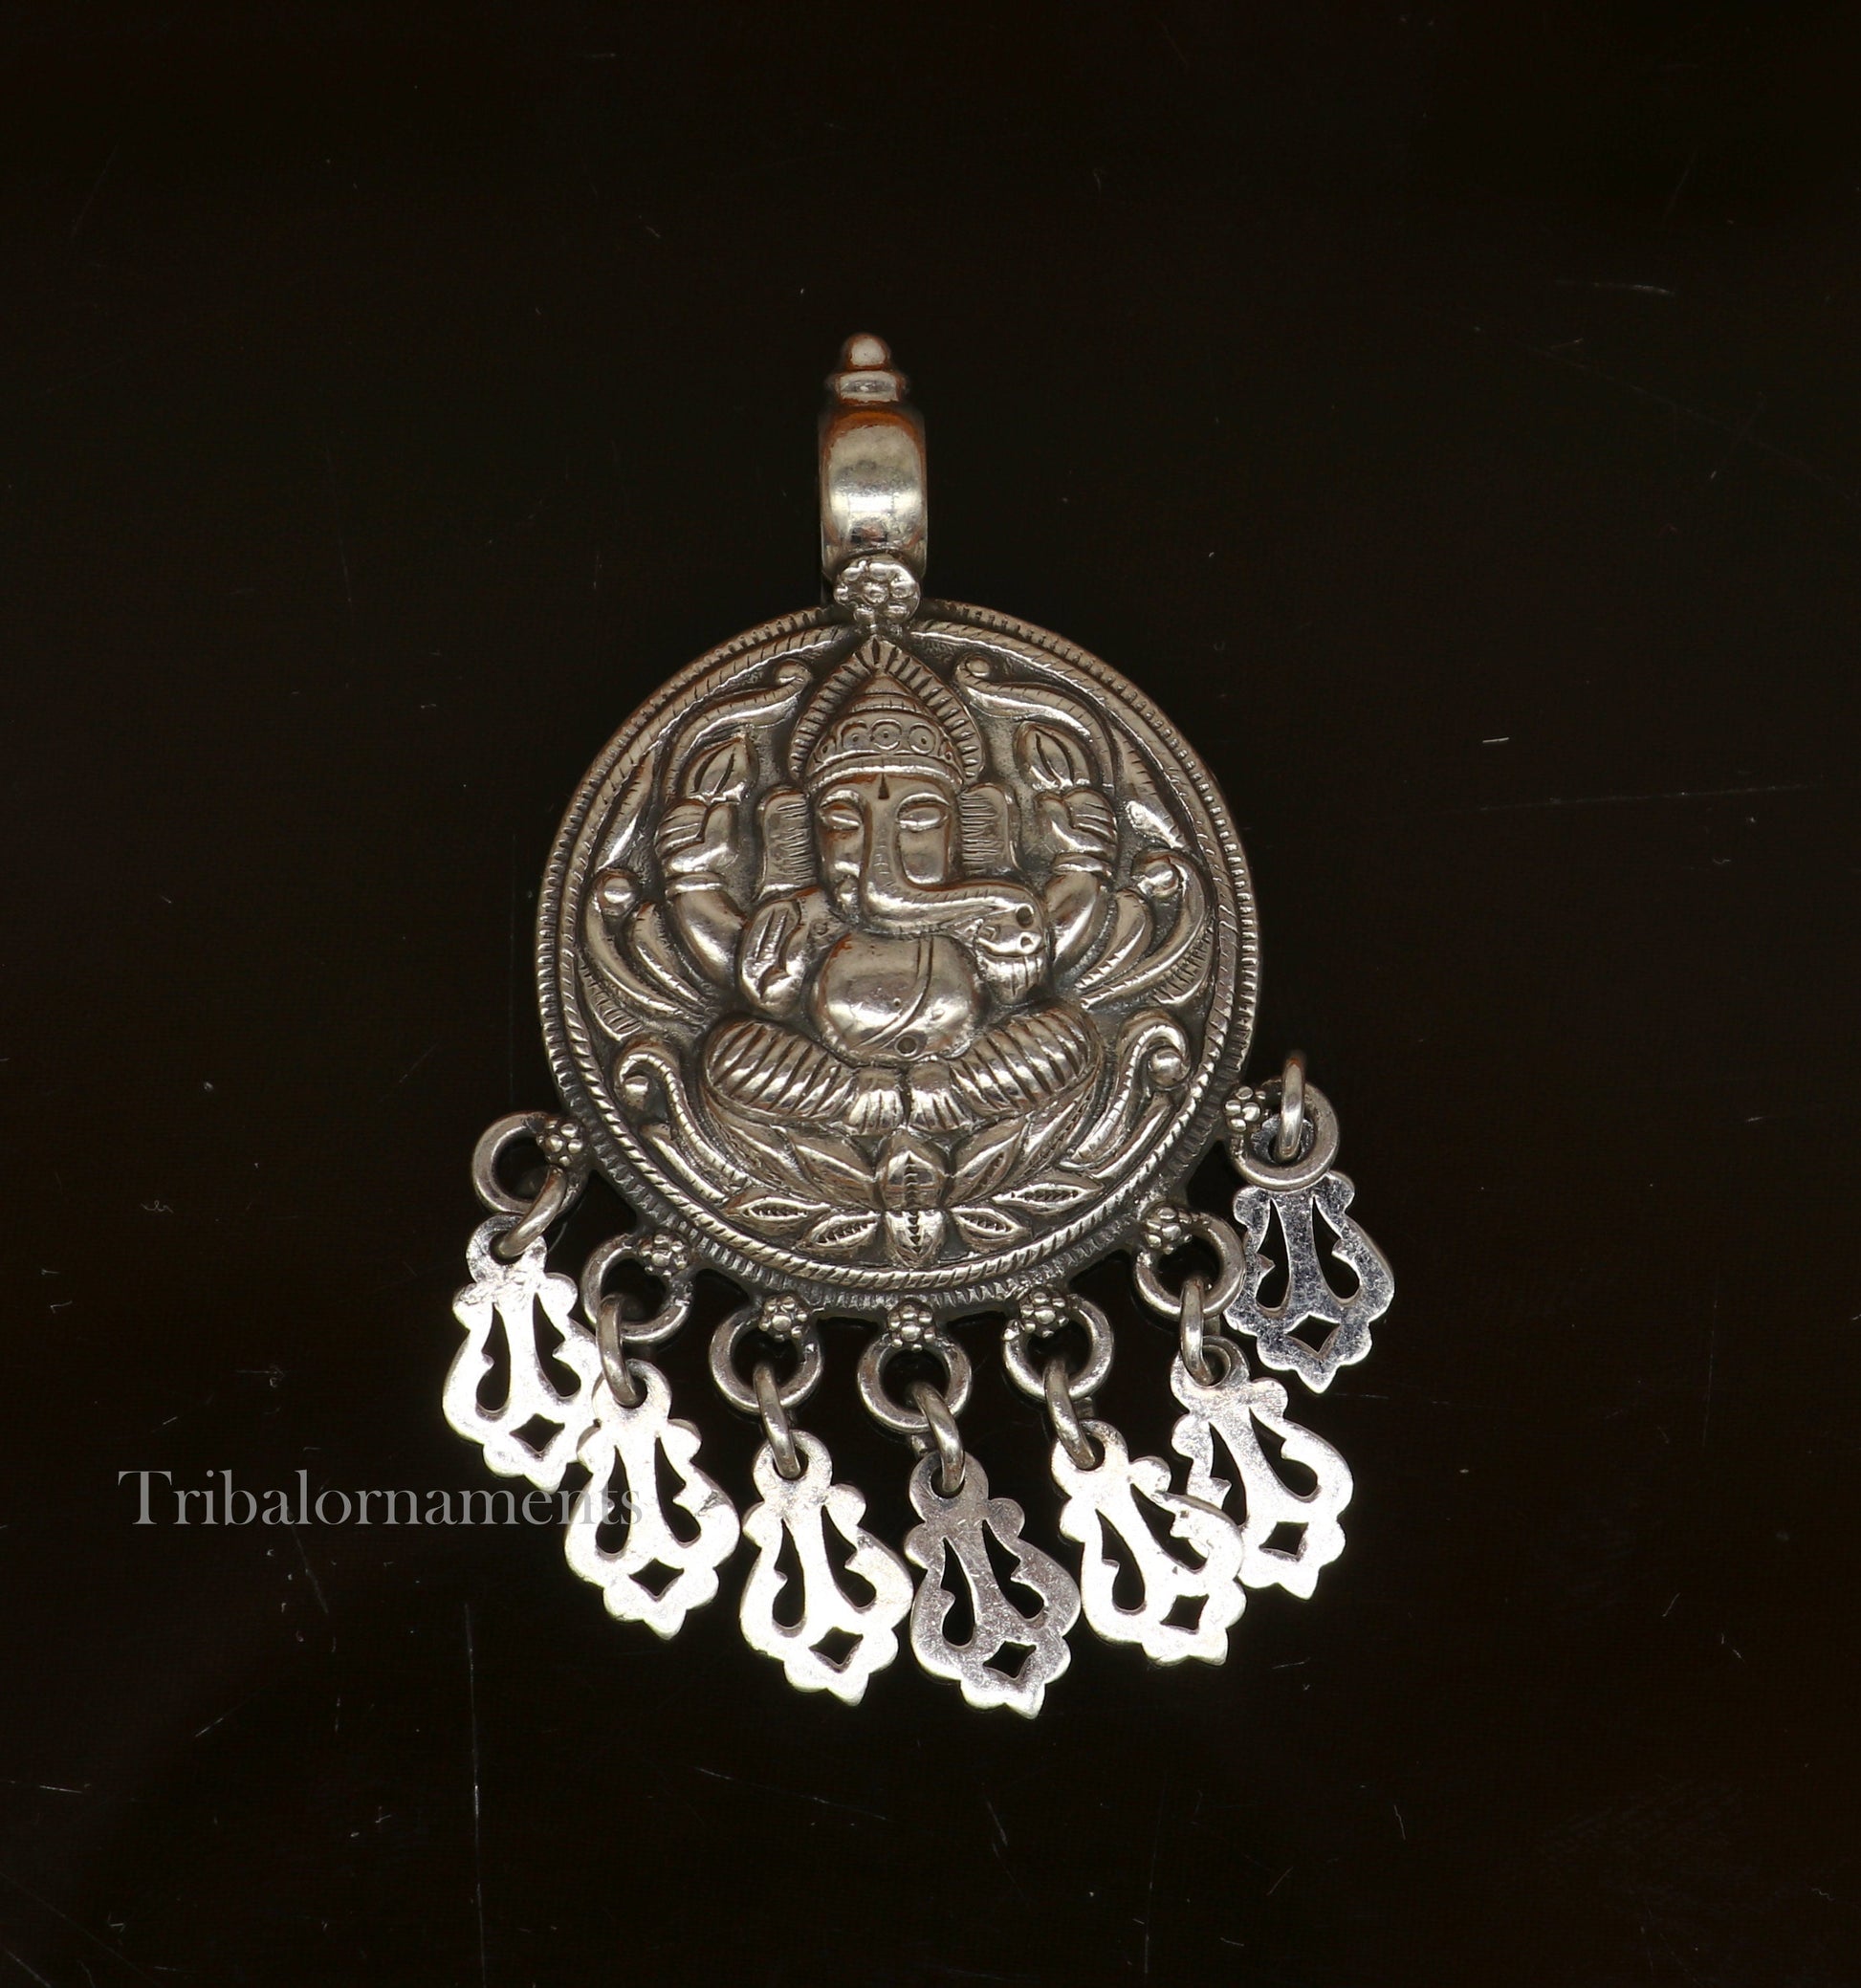 Lord Ganesha vintage style pendant handmade 925 sterling silver pendant with stunning hangings tribal jewelry pendant necklace india ssp835 - TRIBAL ORNAMENTS